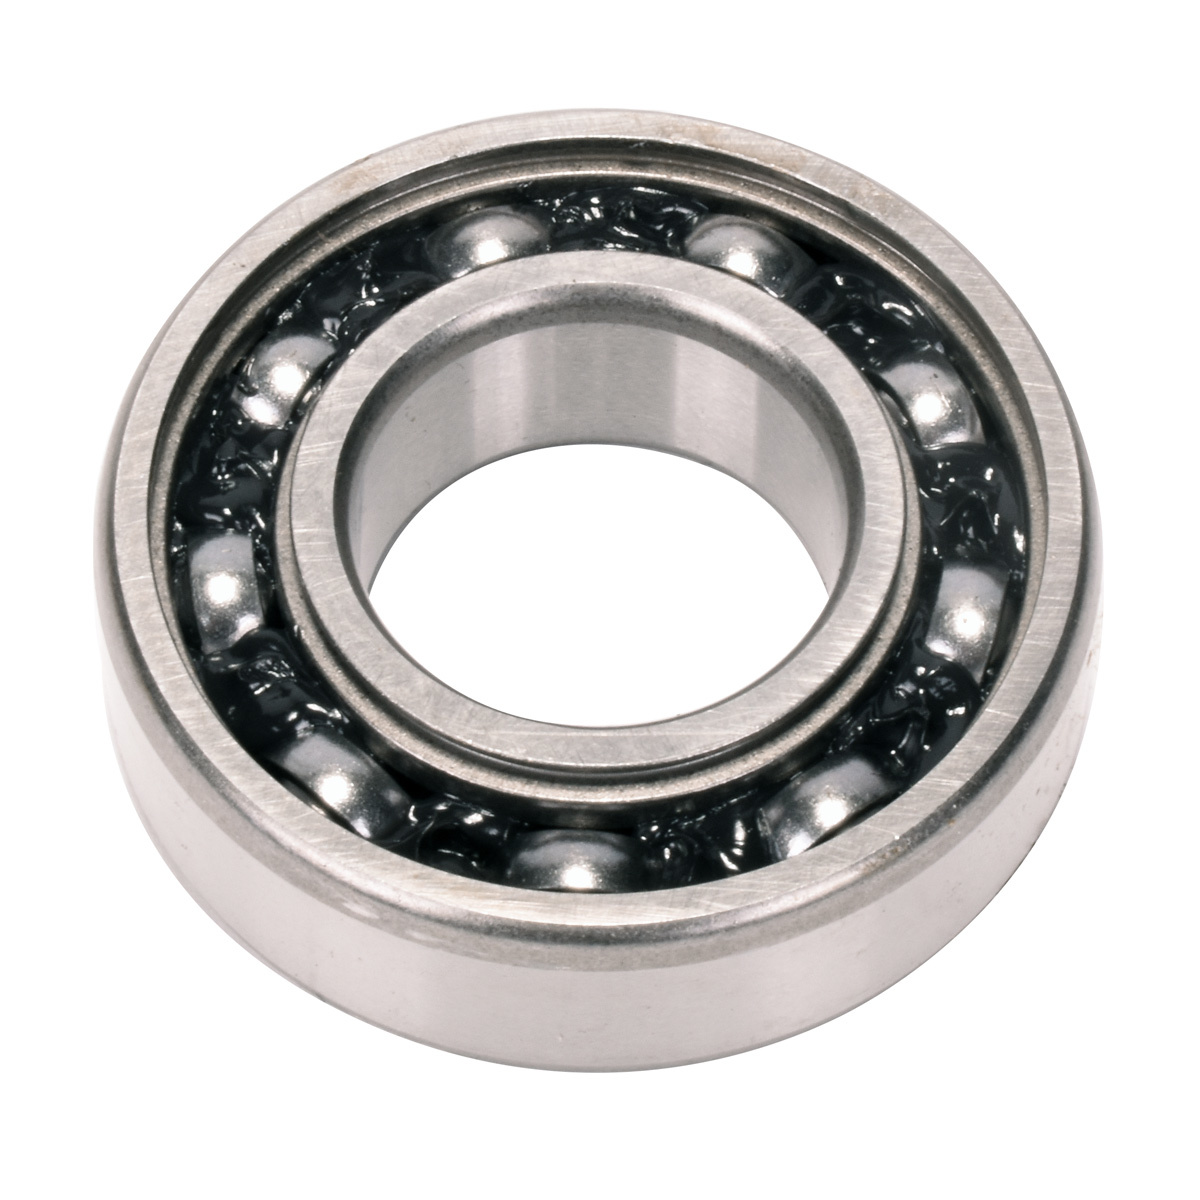 Spindle Ball Bearing for X400, X500, X700, Z500, Z600 and Z900 Series